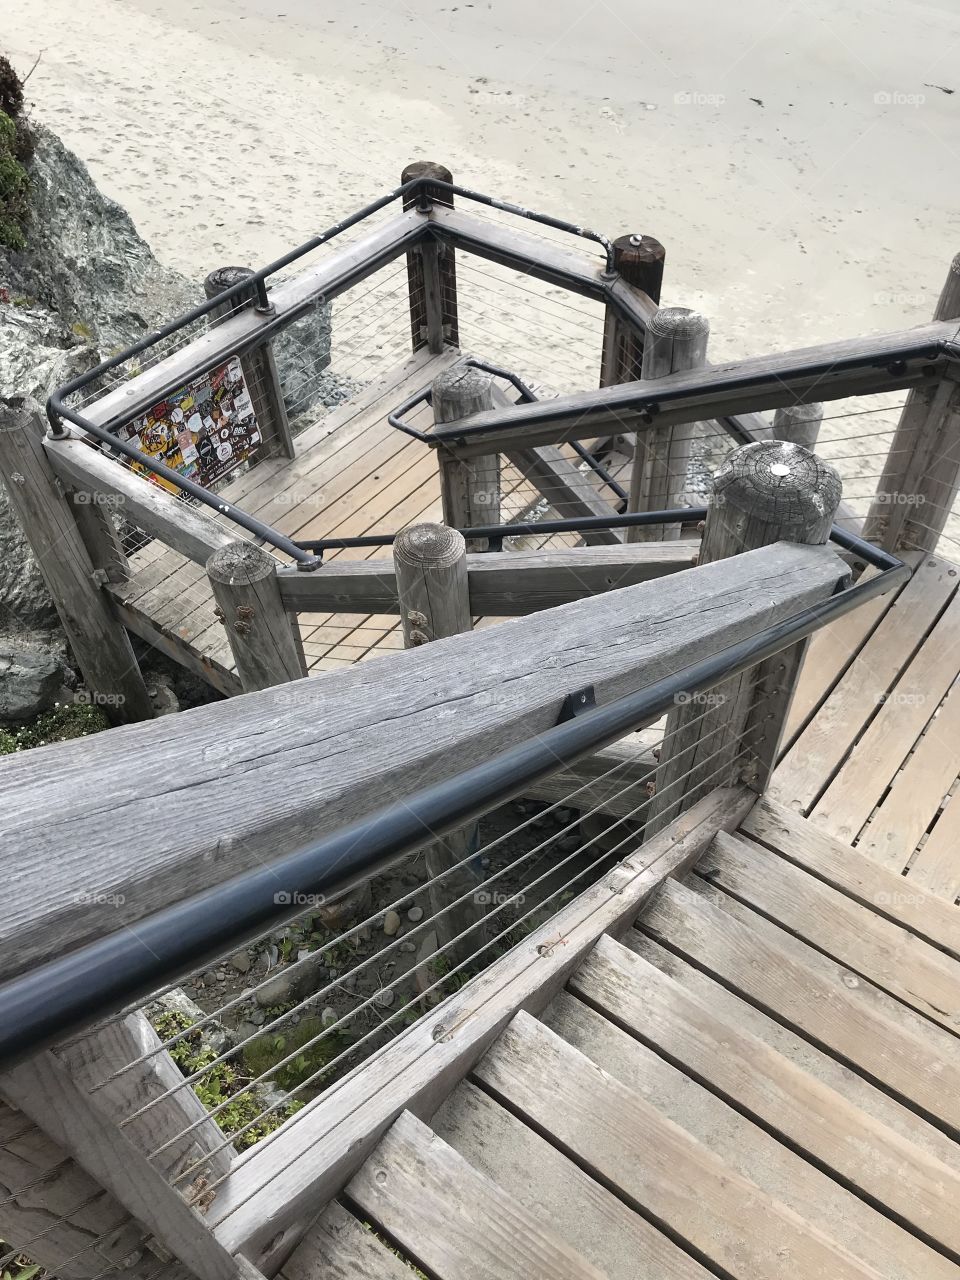 Twisting downwards towards the damp sand of a coastal beach, the staircase’s weathered wood posts and metal rails start to blend into the landscape. 